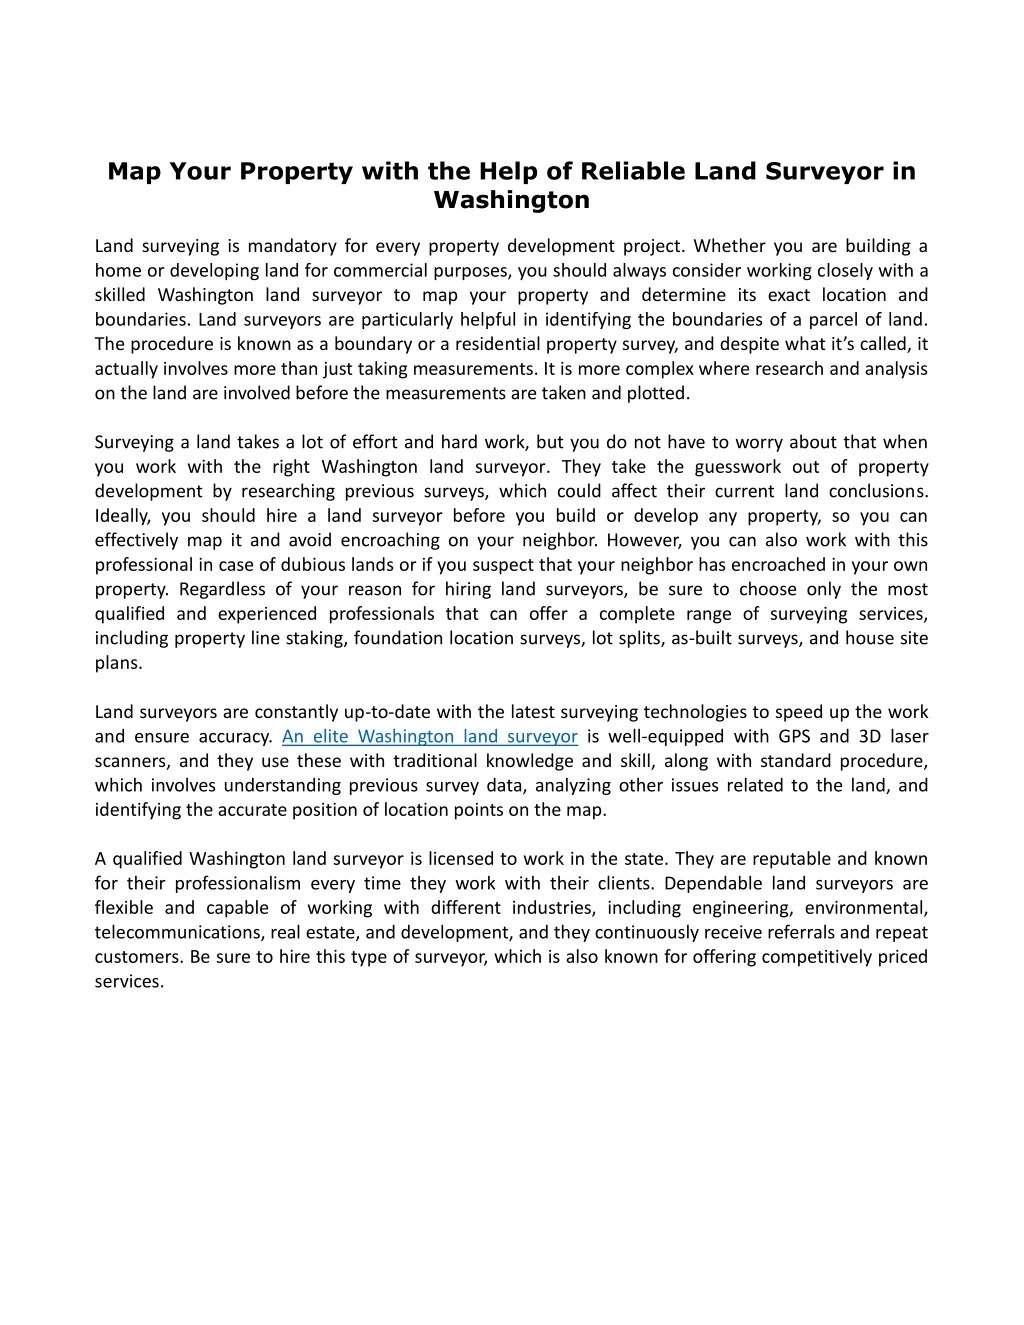 map your property with the help of reliable land